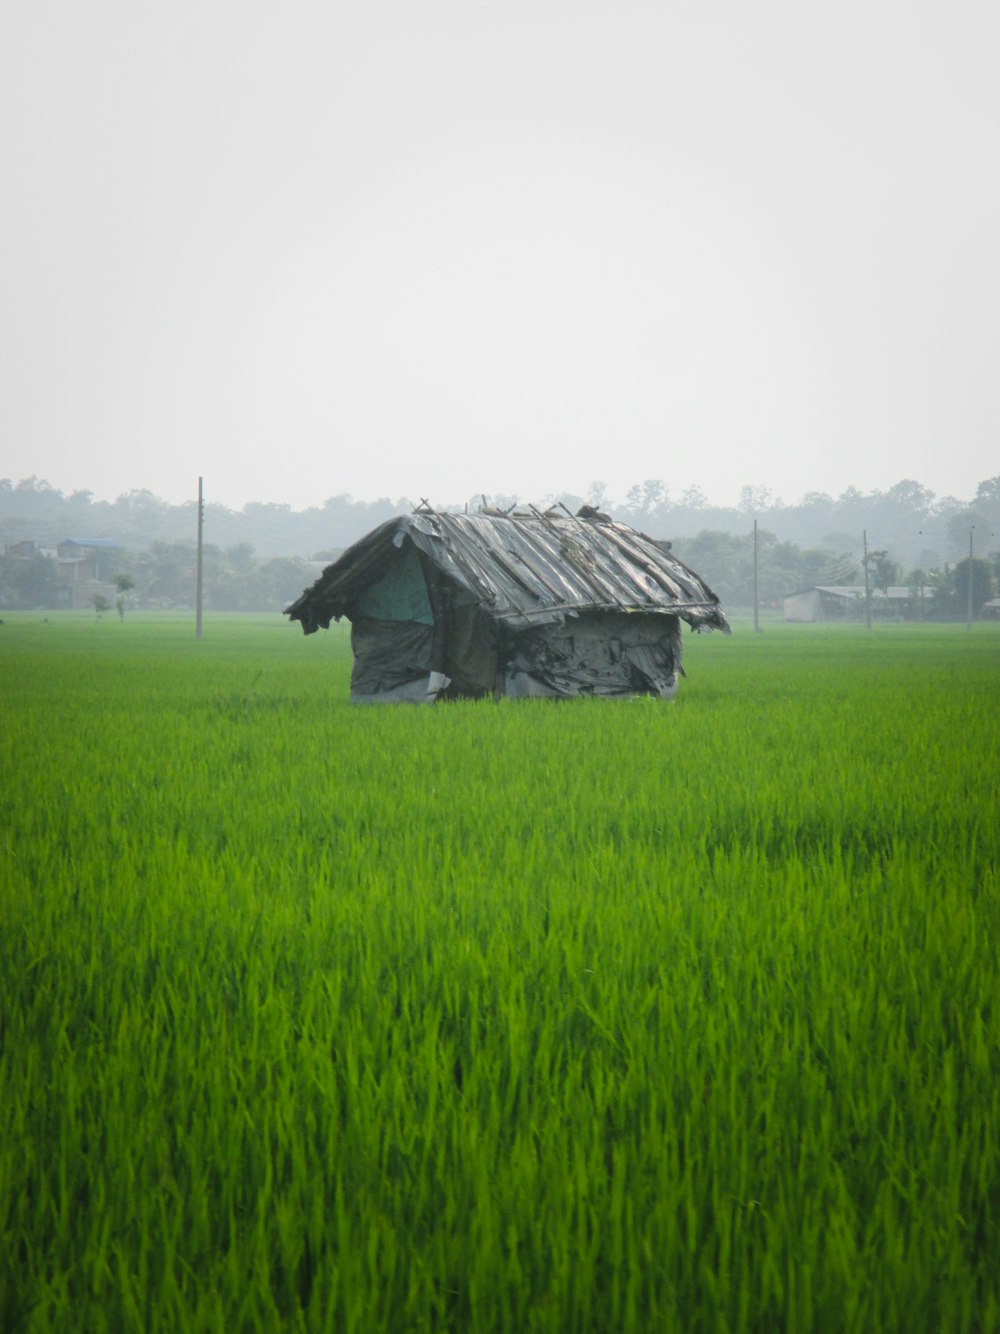 a house in the middle of a green field